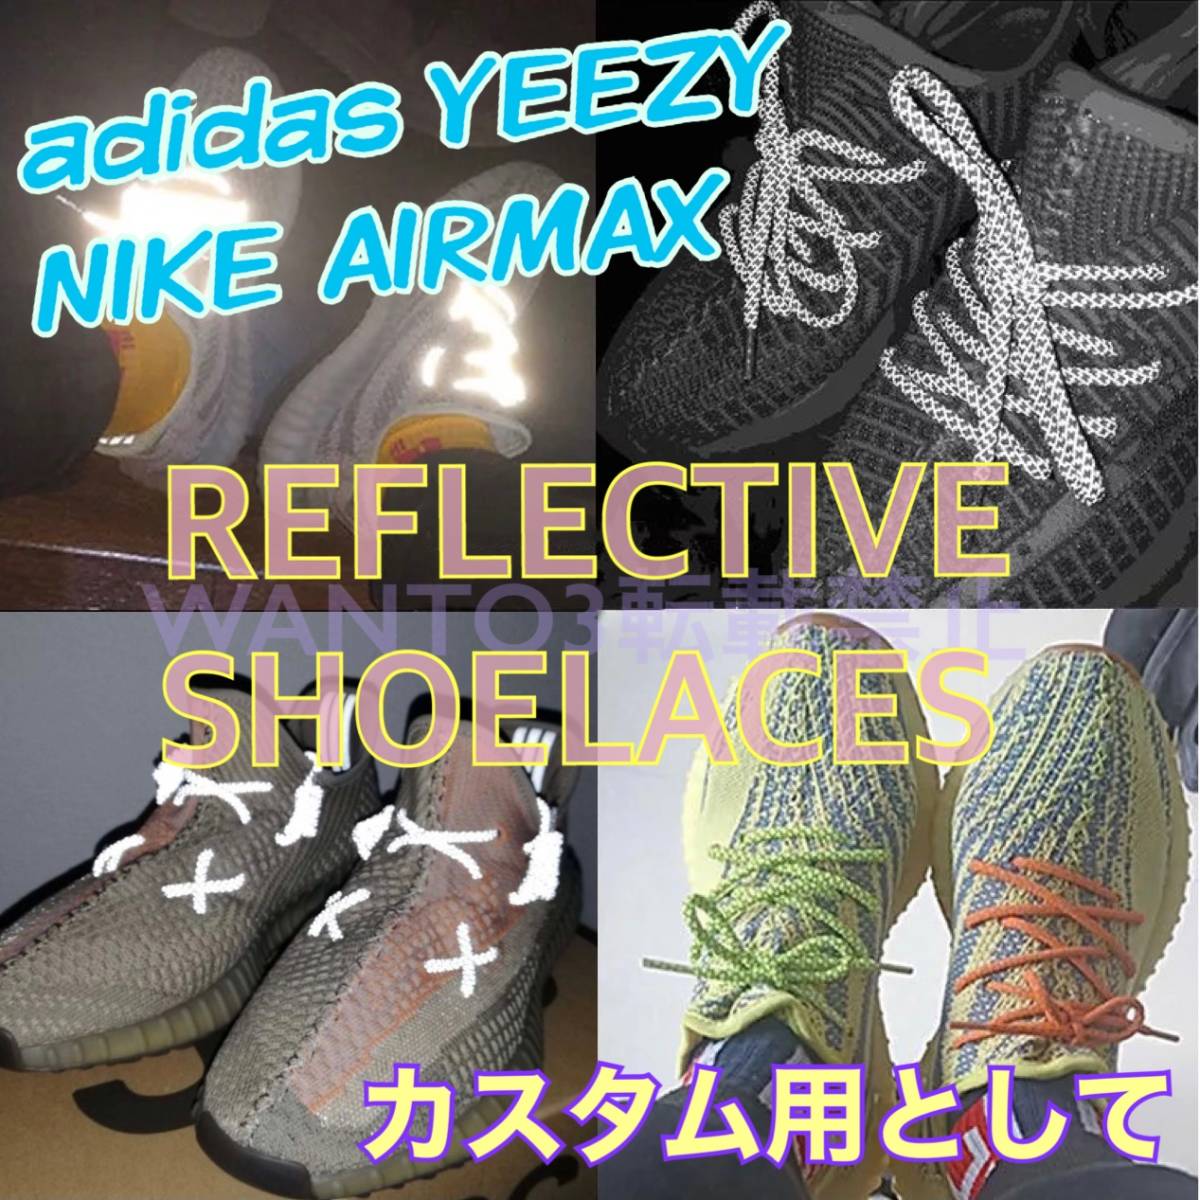  most high quality *1 pair minute pin Cliff rektib shoe race reflection shoe lace Adidas yeezy nike Nike airmax 90 air max 95 97 98.